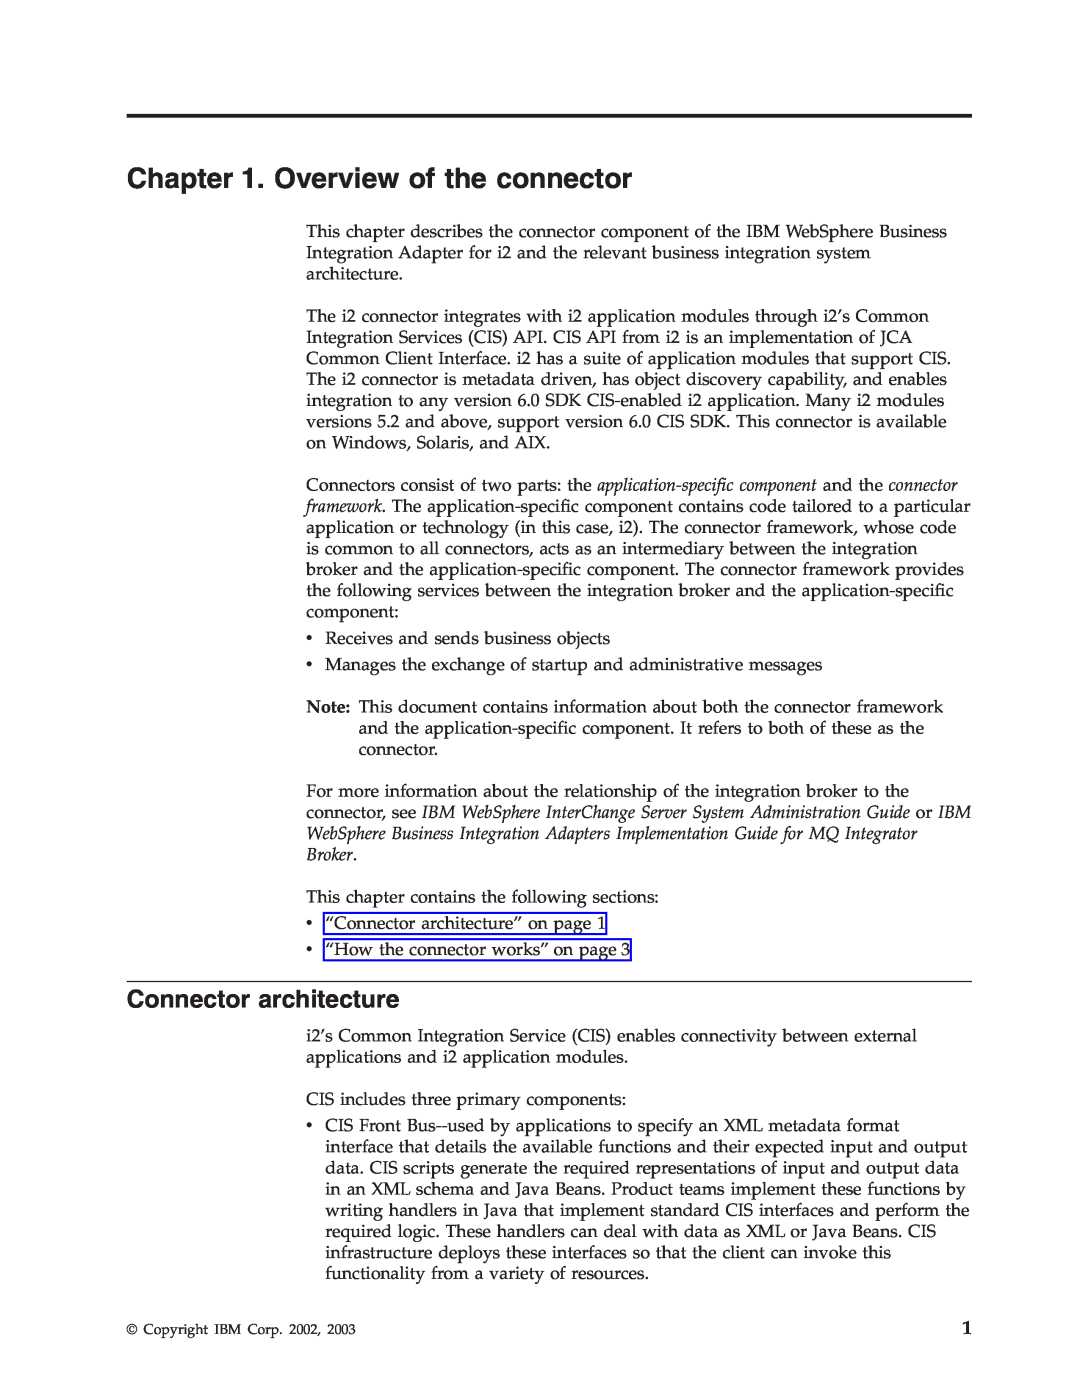 IBM WebSphere Business Integration Adapter manual Overview of the connector, Connector architecture 